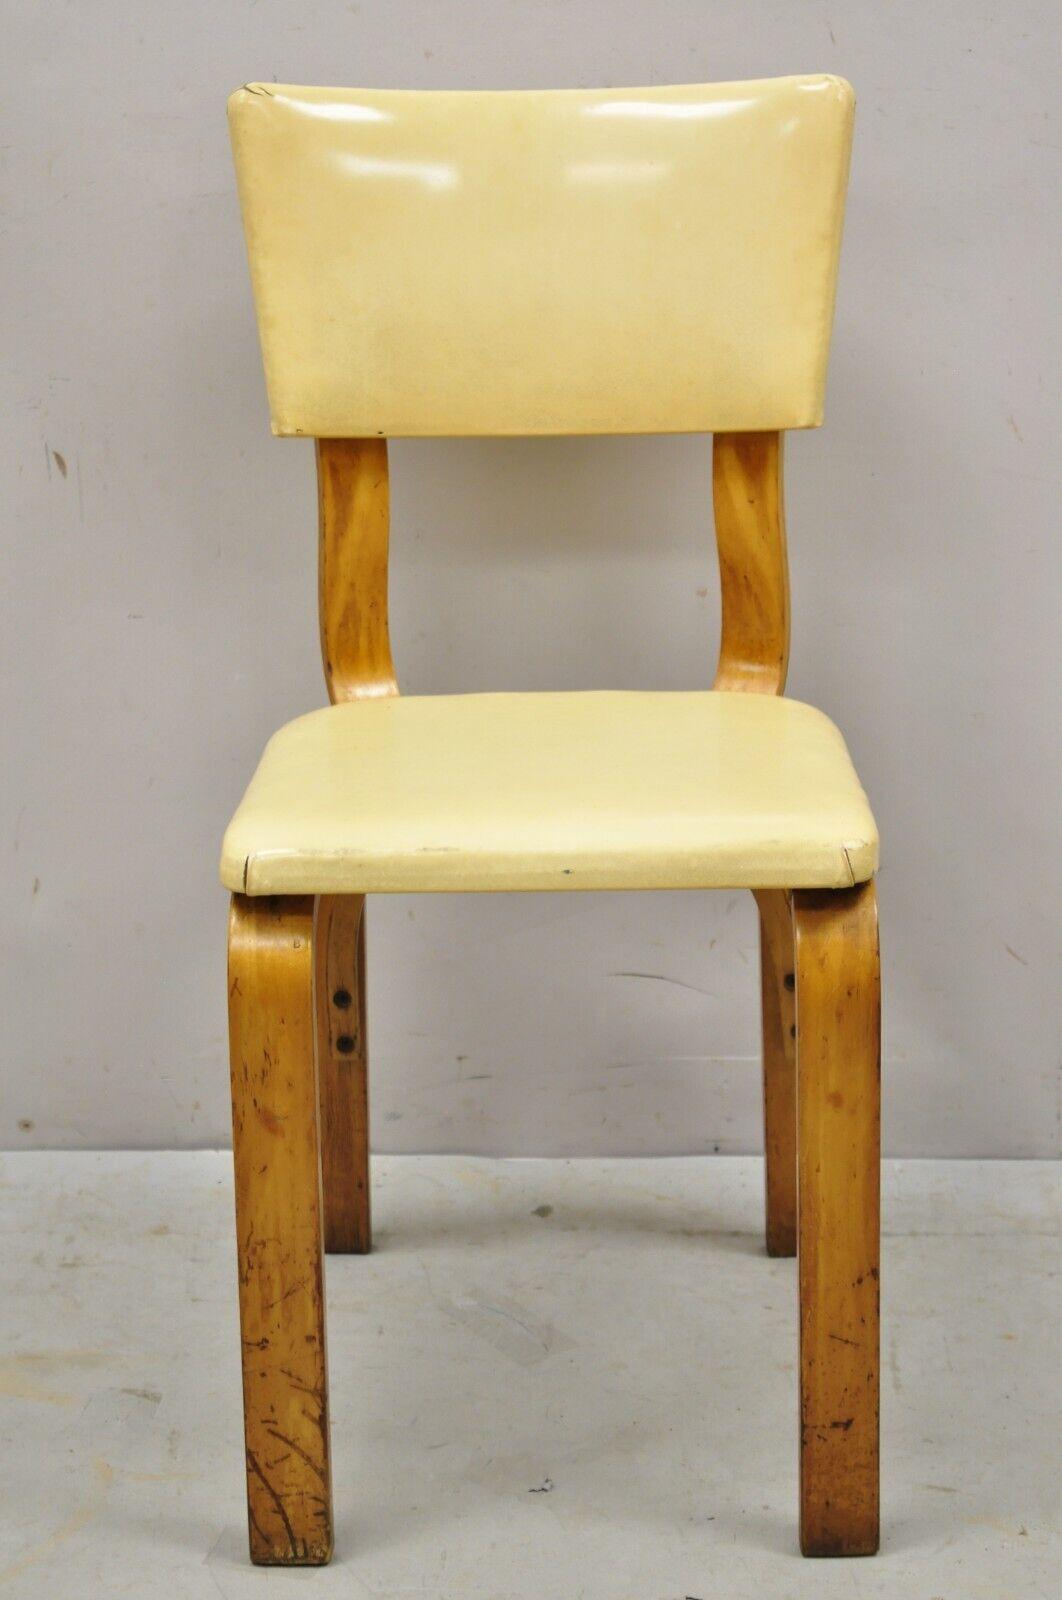 Vintage thonet bentwood dining side chair with beige vinyl seat. Item features bentwood frames, beige vinyl upholstery, very nice vintage item, great style and form. Circa mid-20th century. Measurements: 33